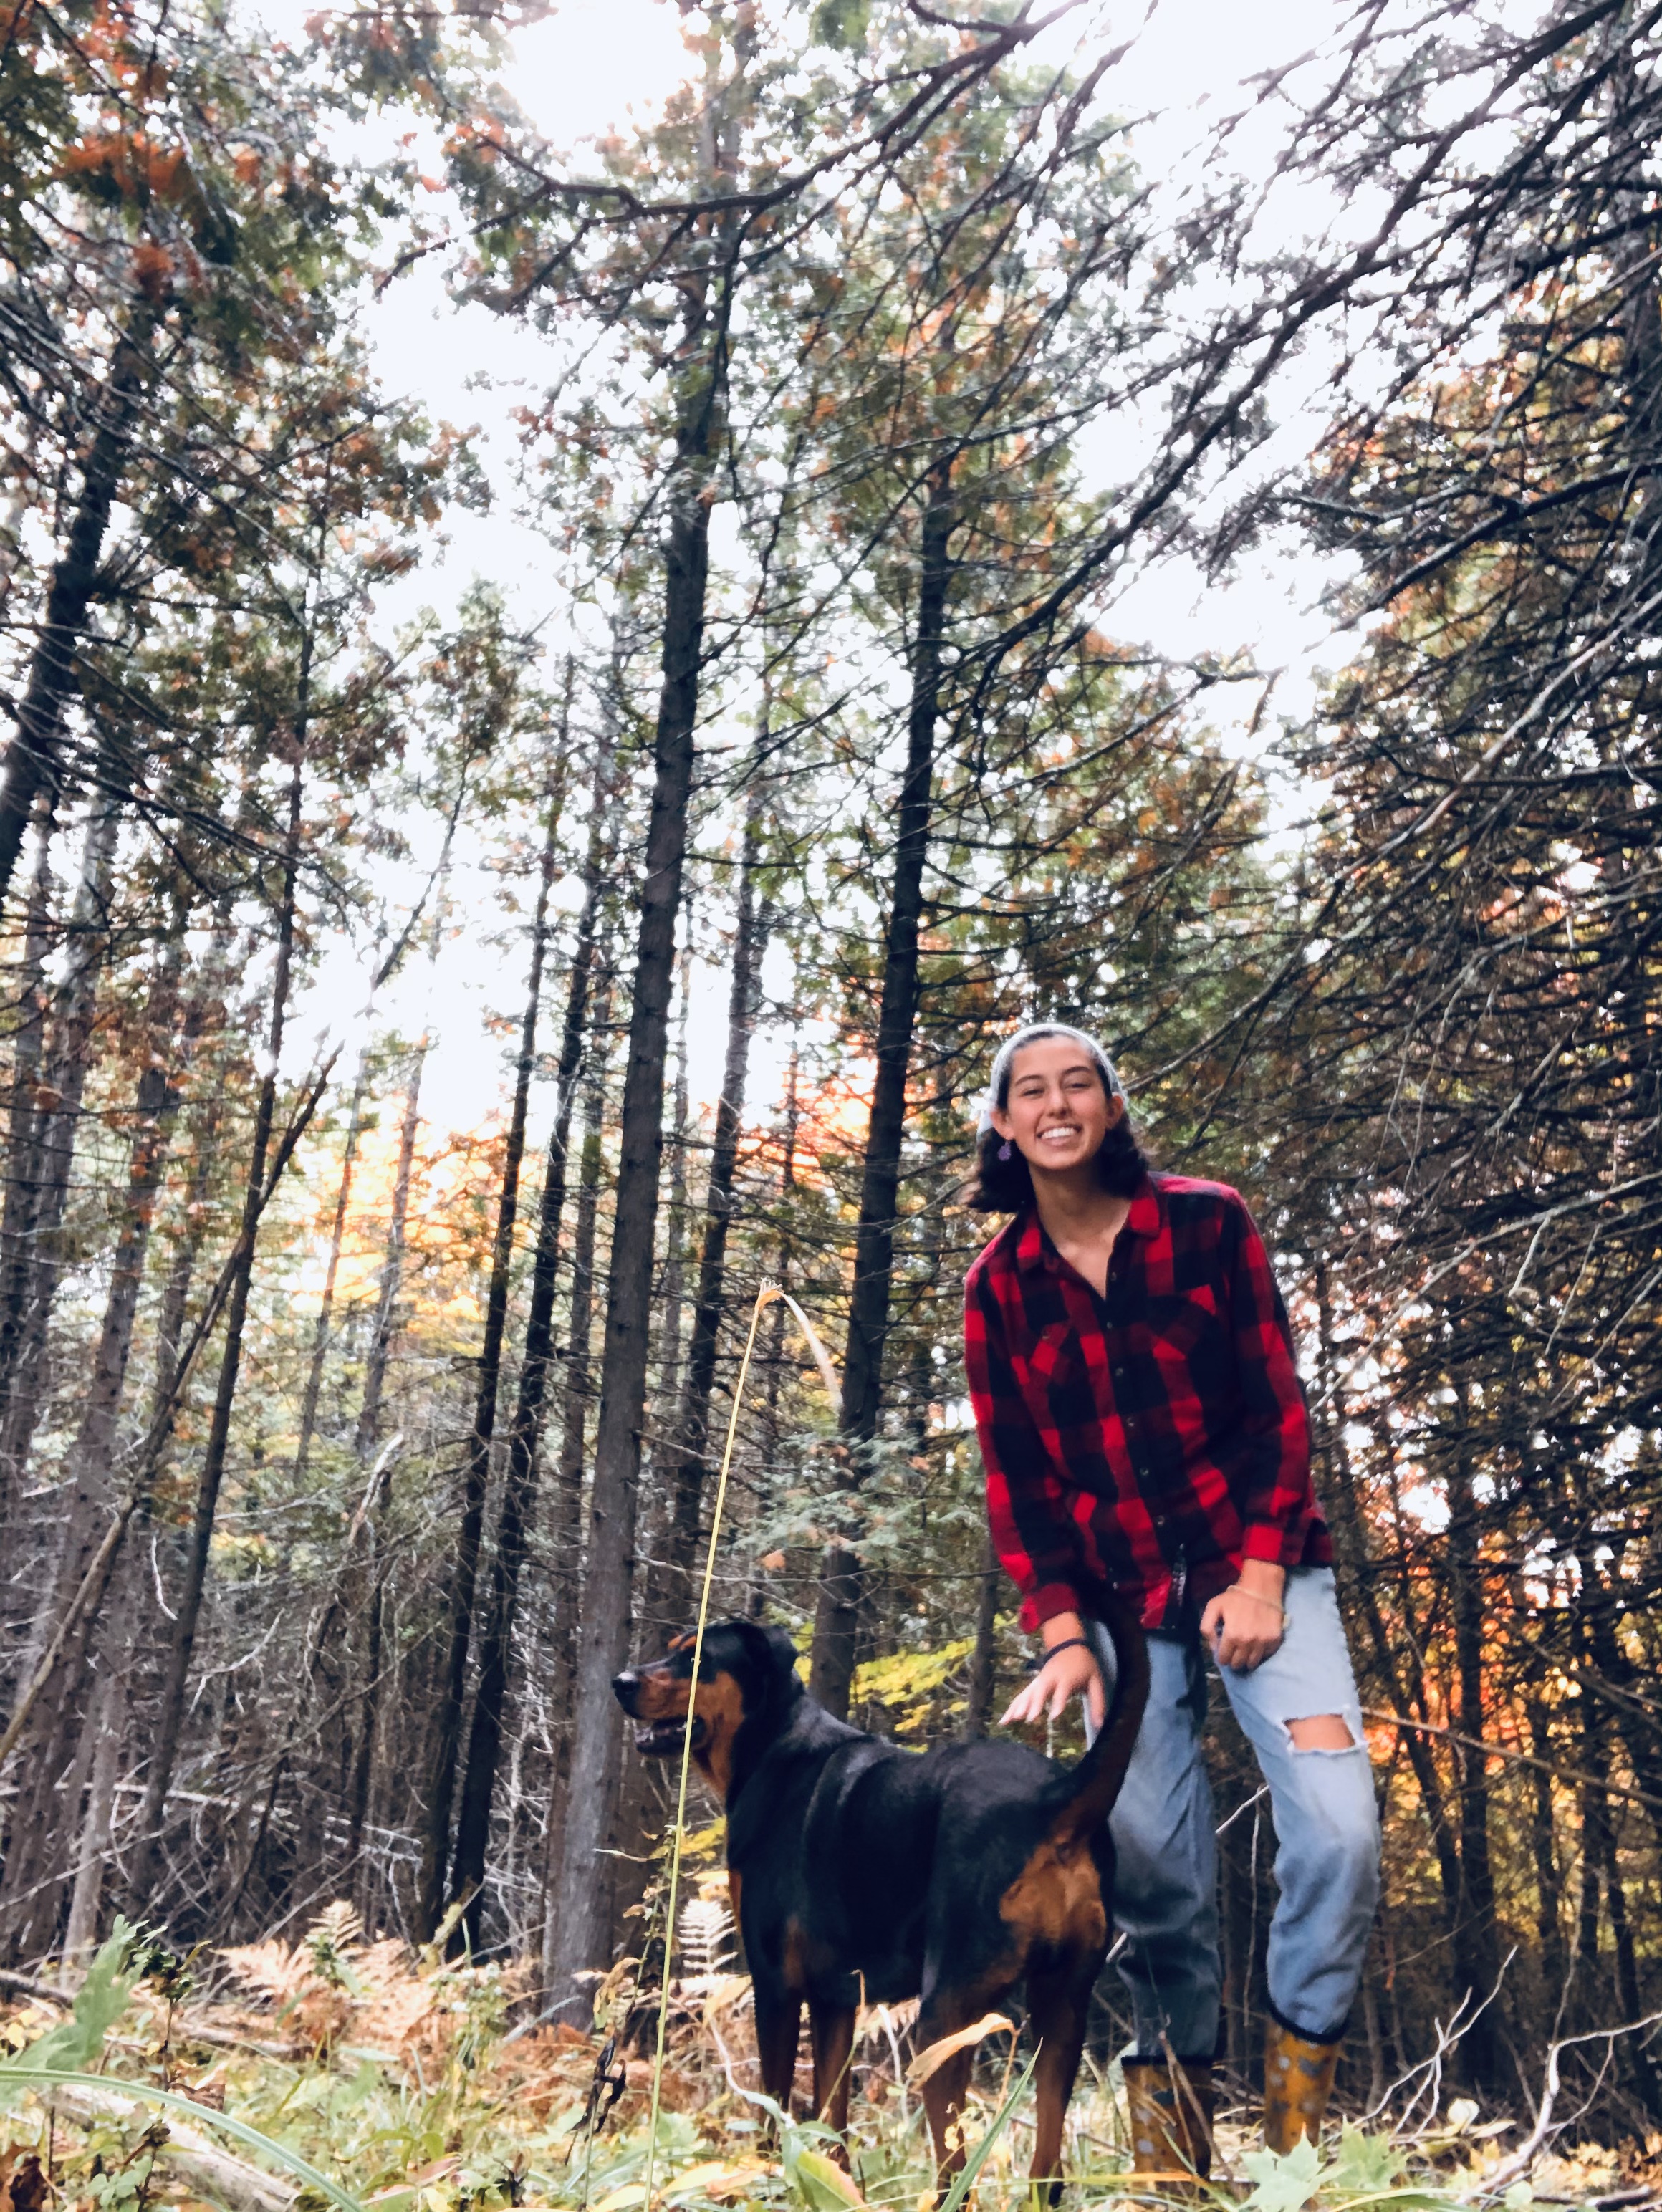 Olivia Rodriguez stands among trees with a dog